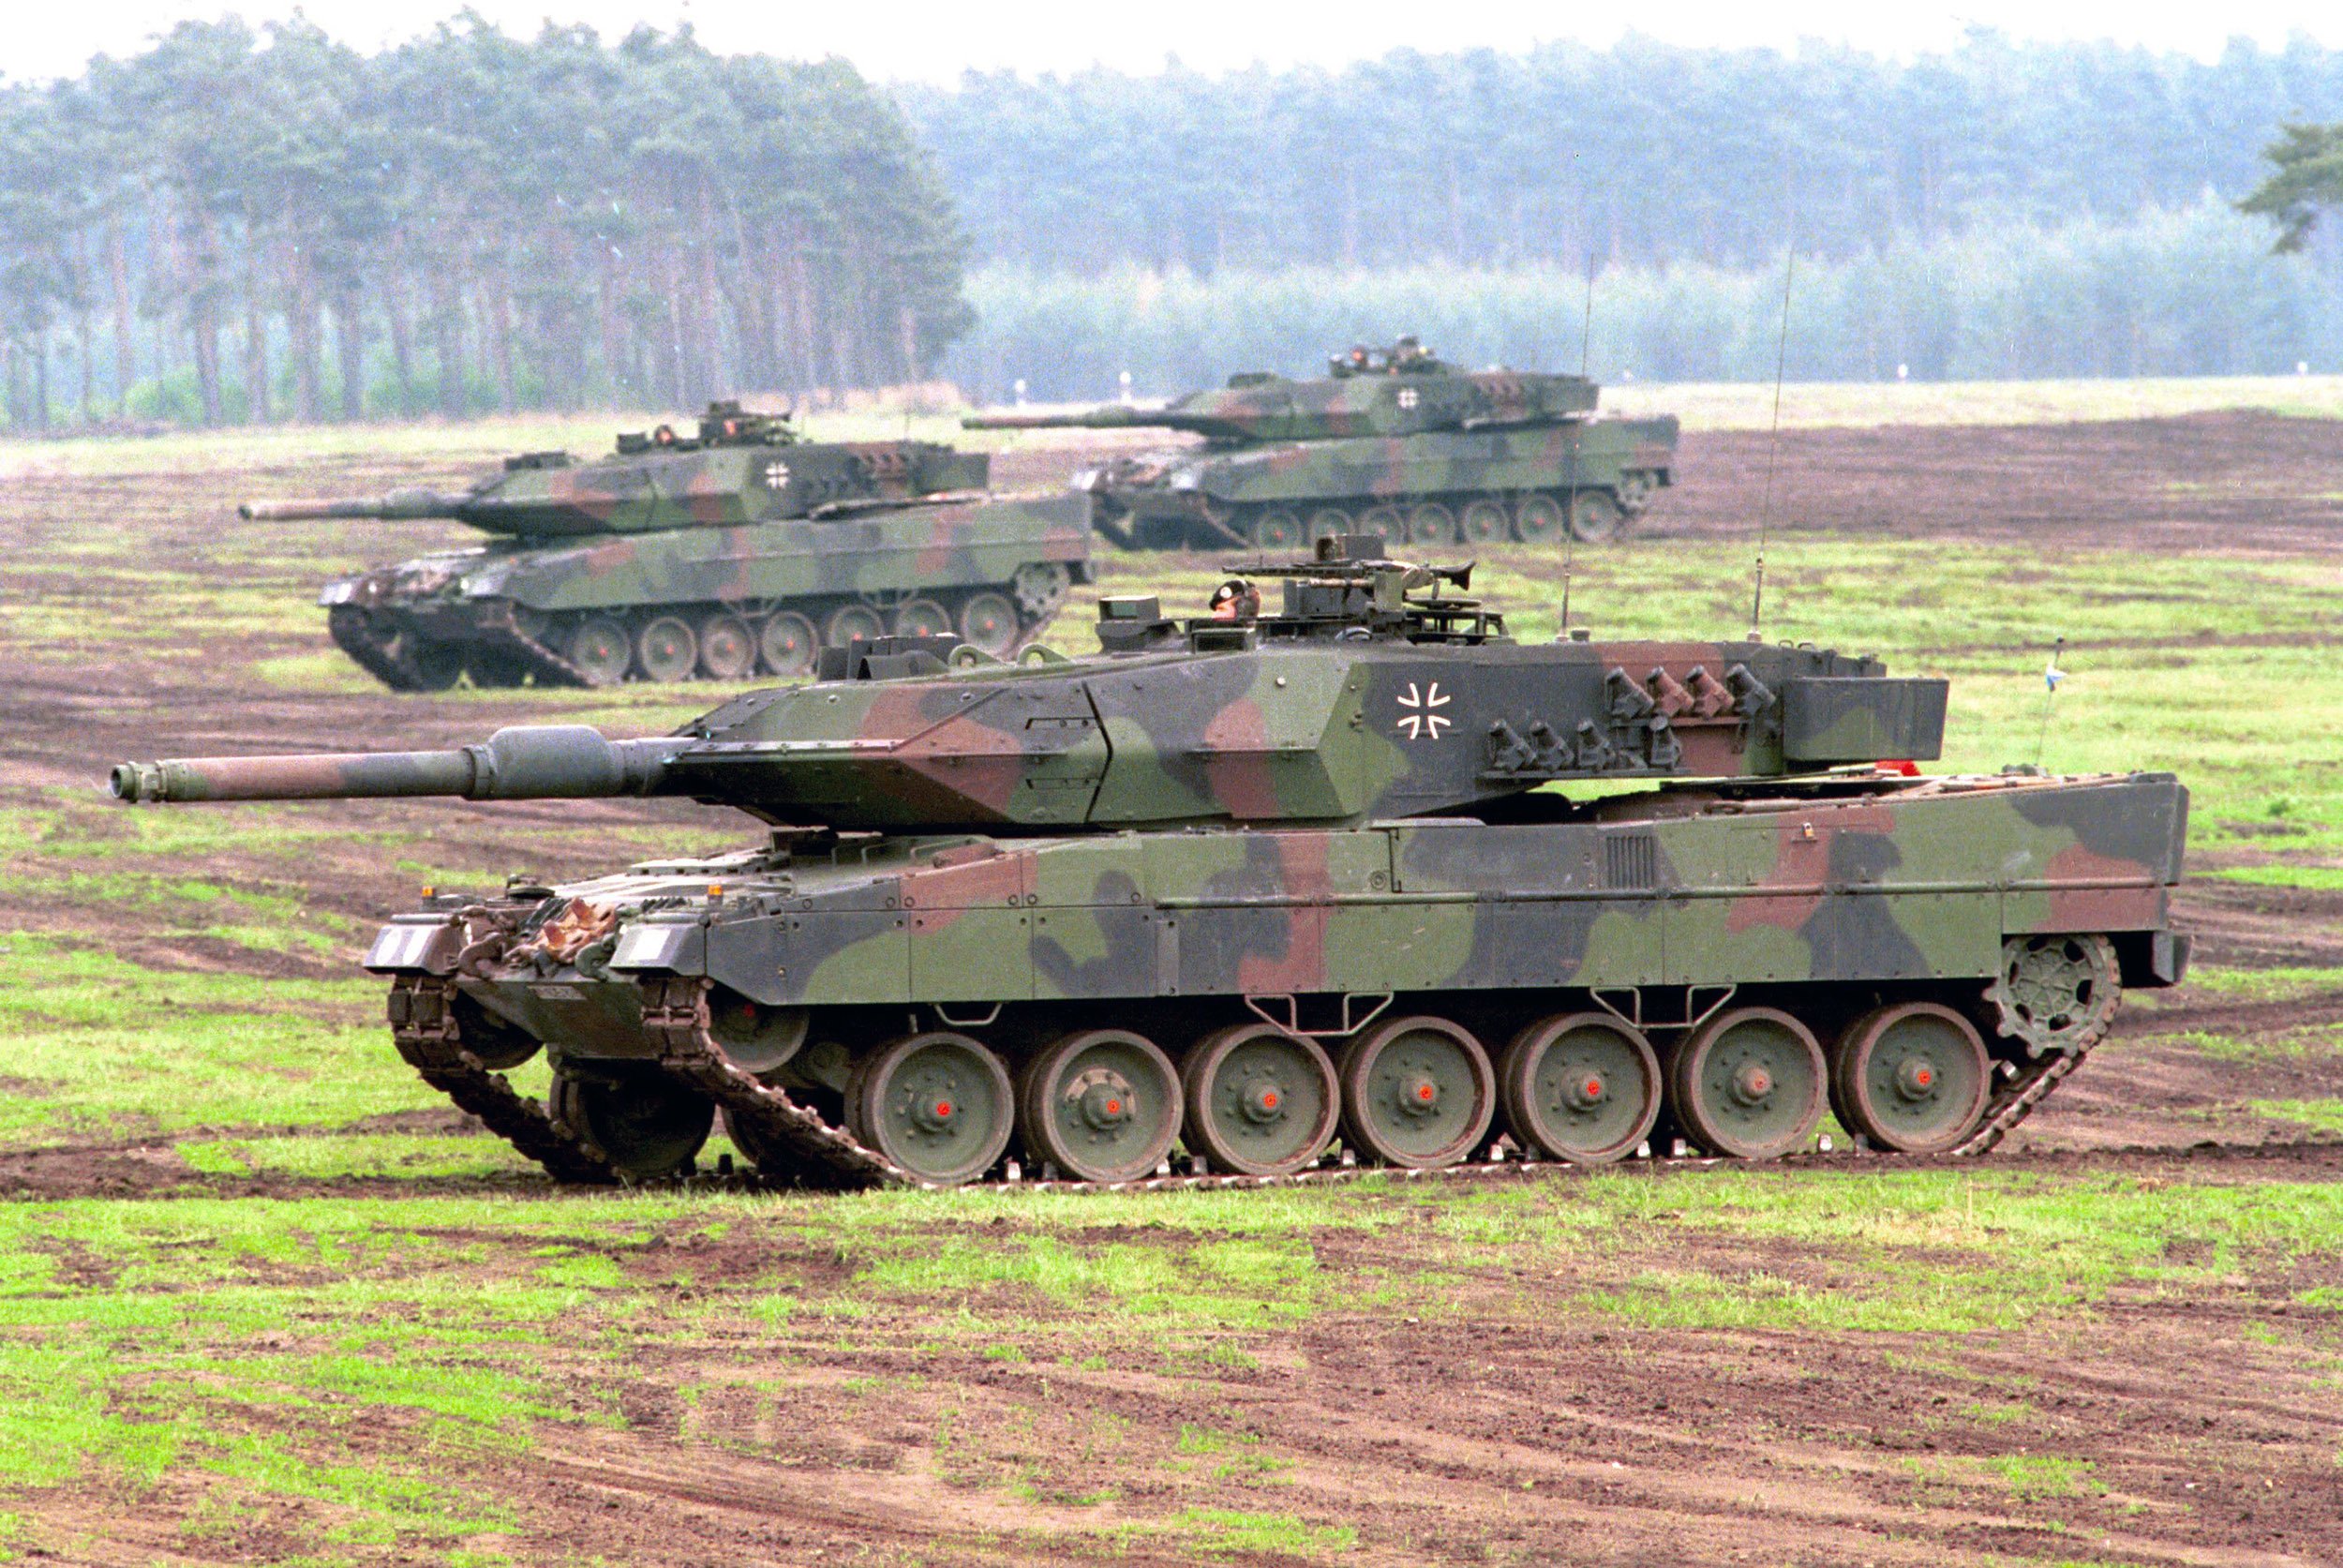 Germany’s Leopard 2 Tank Was Considered One of the Best (Until It